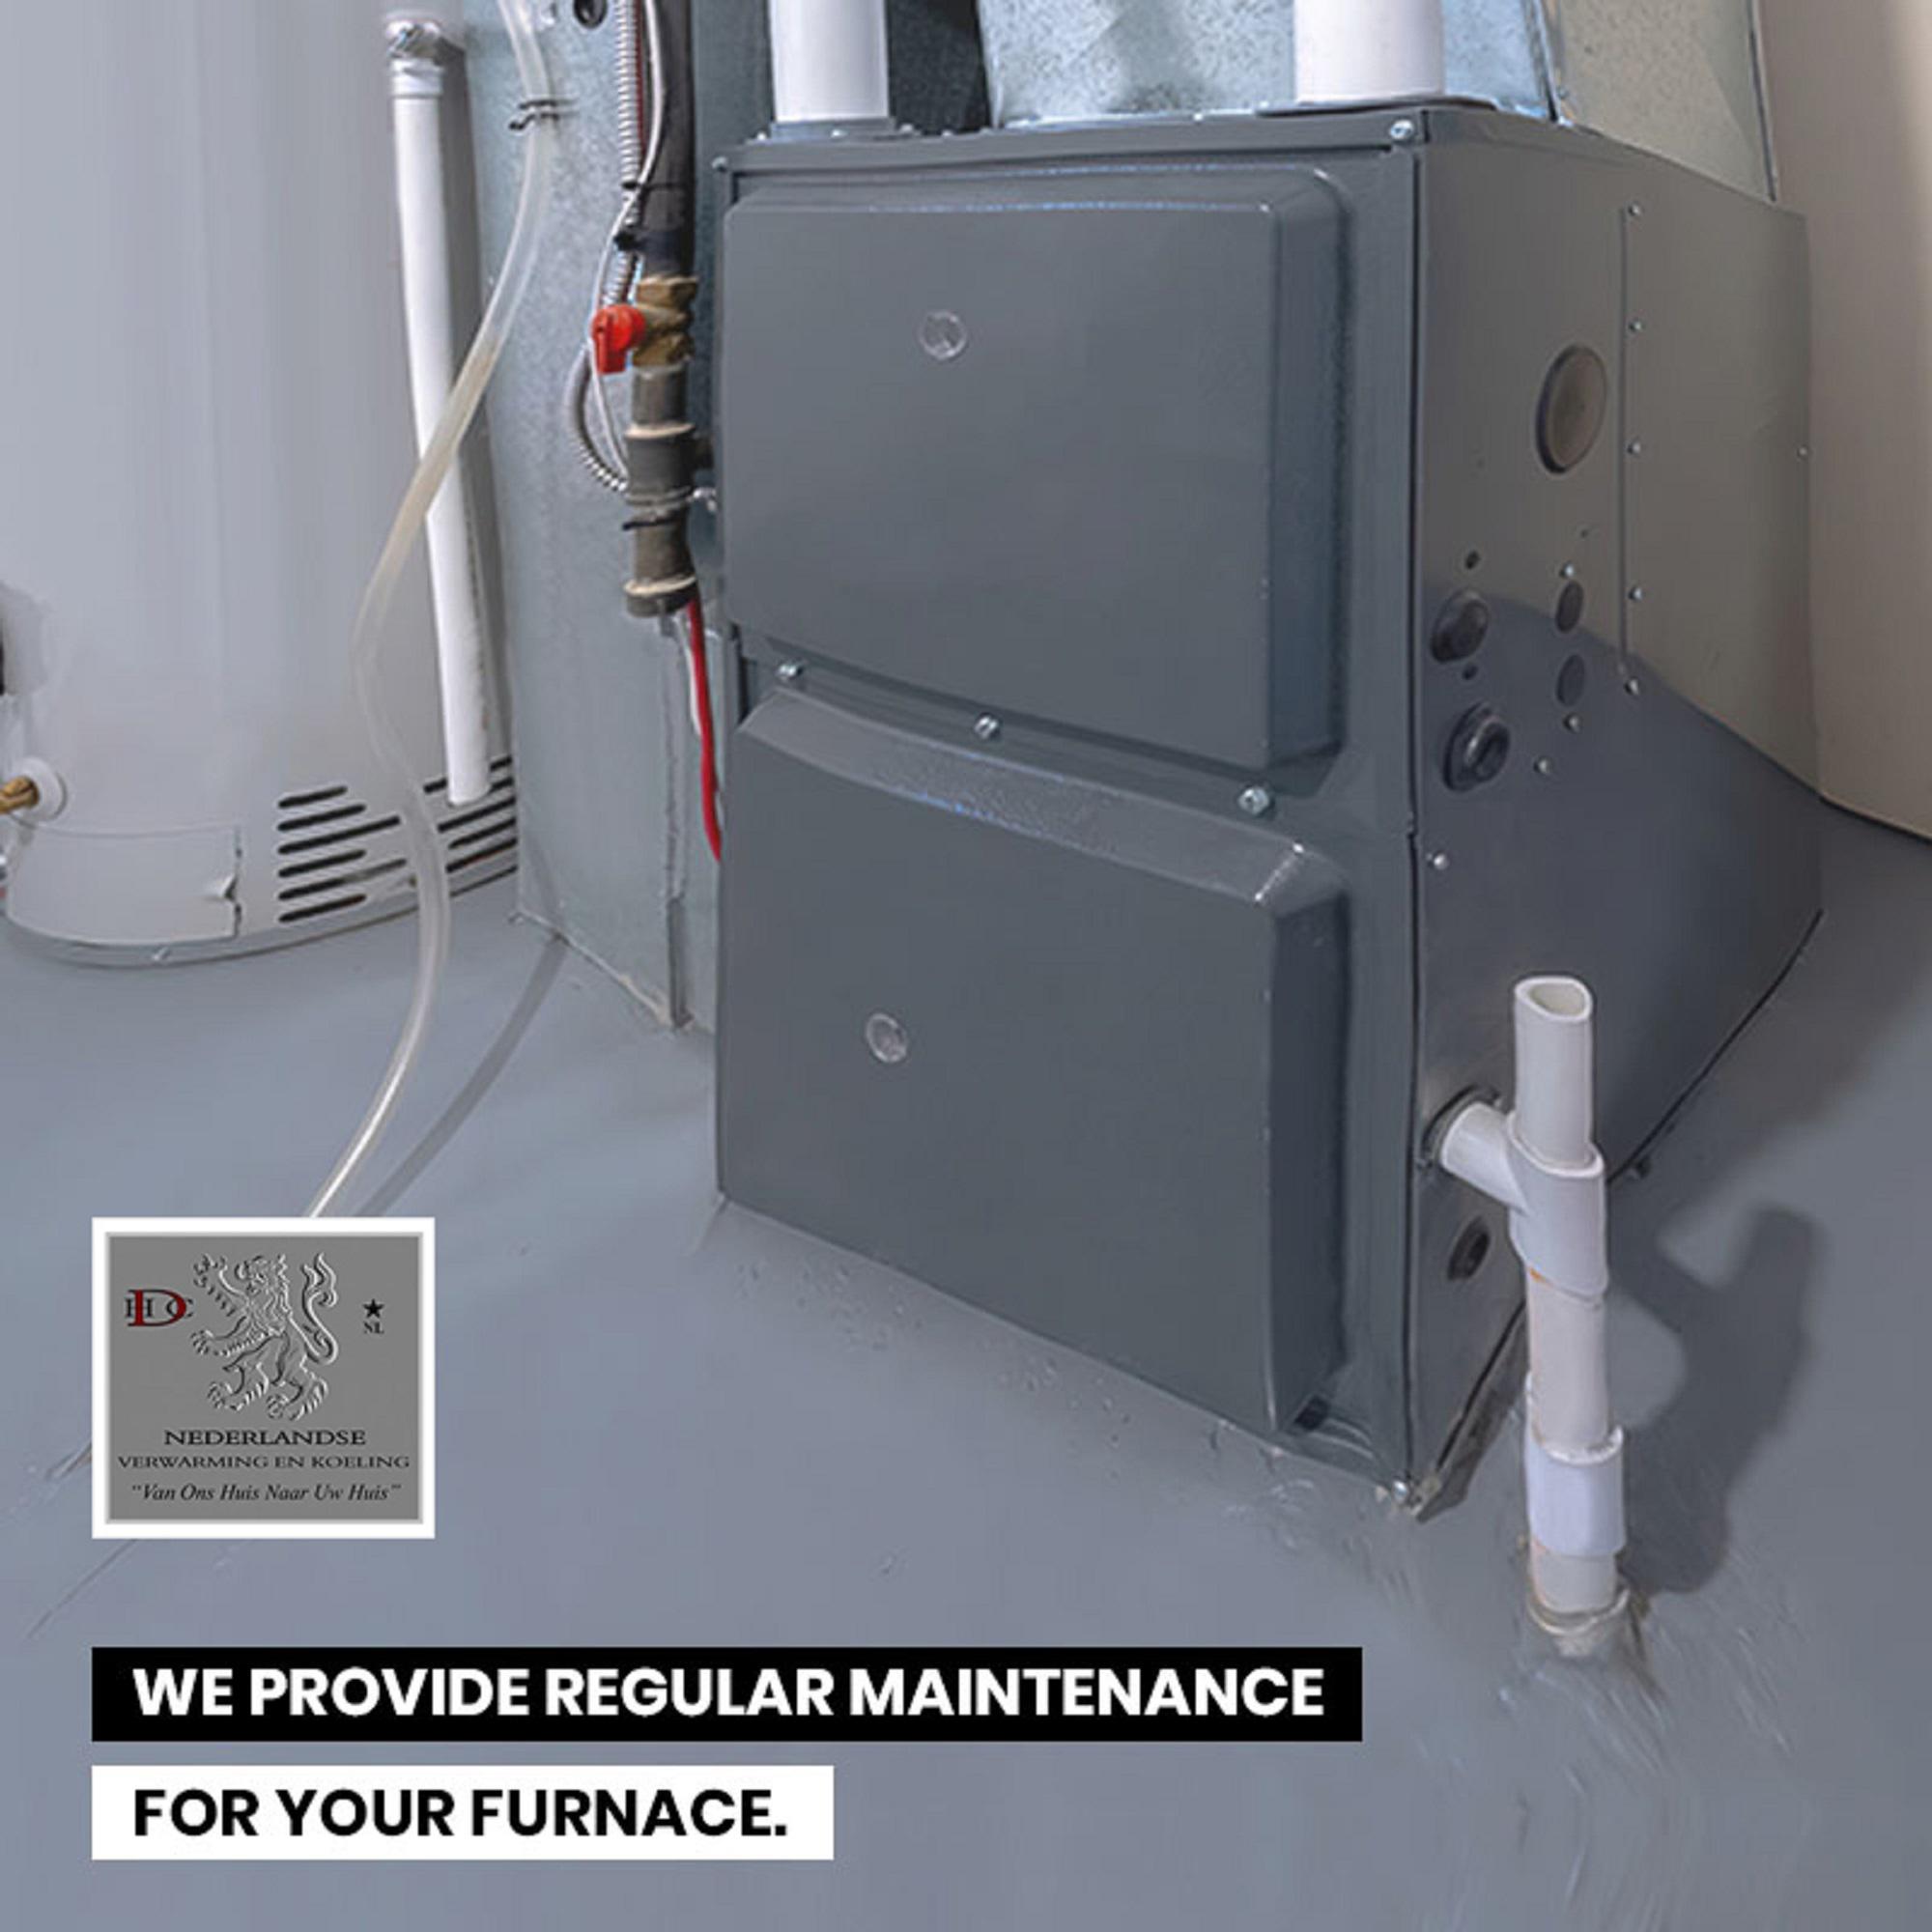 Your furnace needs regular maintenance so that it can keep you warm for an extended period. We are available to provide a routine maintenance tune-up of your system. If we run into any issues during the tune-up, our HVAC technicians can quickly resolve them for you.